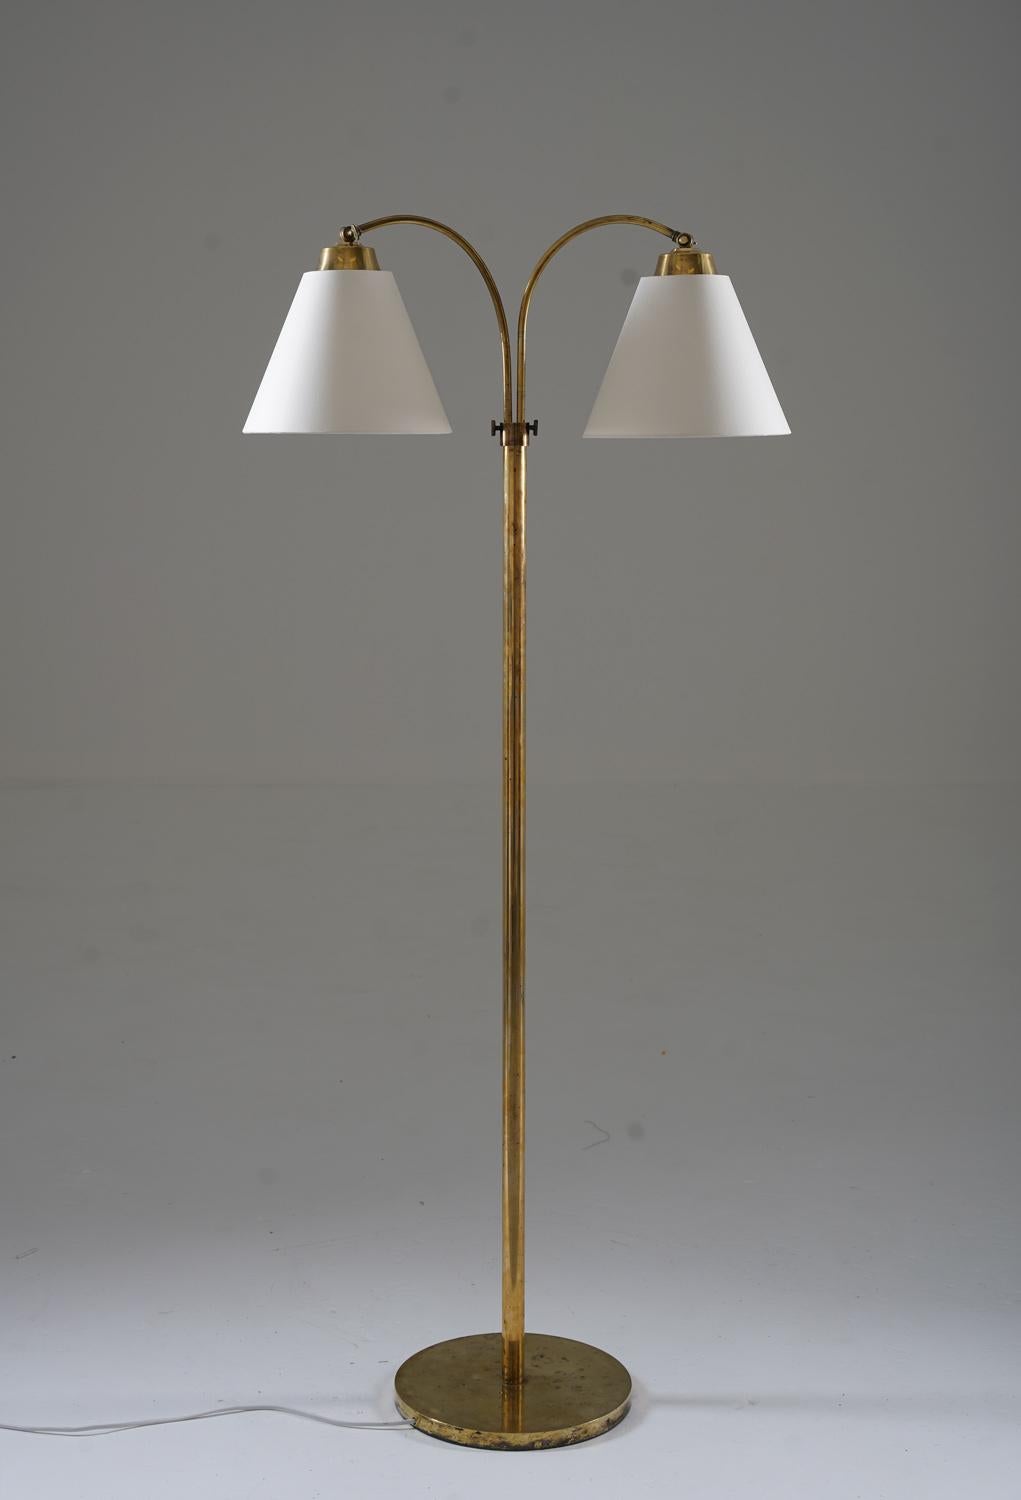 Lovely Swedish Modern floor lamp manufactured in Sweden, 1940s. 
The lamp consists of a base and rod in brass, supporting two swivel arms that hold the shade. The swivel arms are adjustable in height

Condition: Good vintage condition with